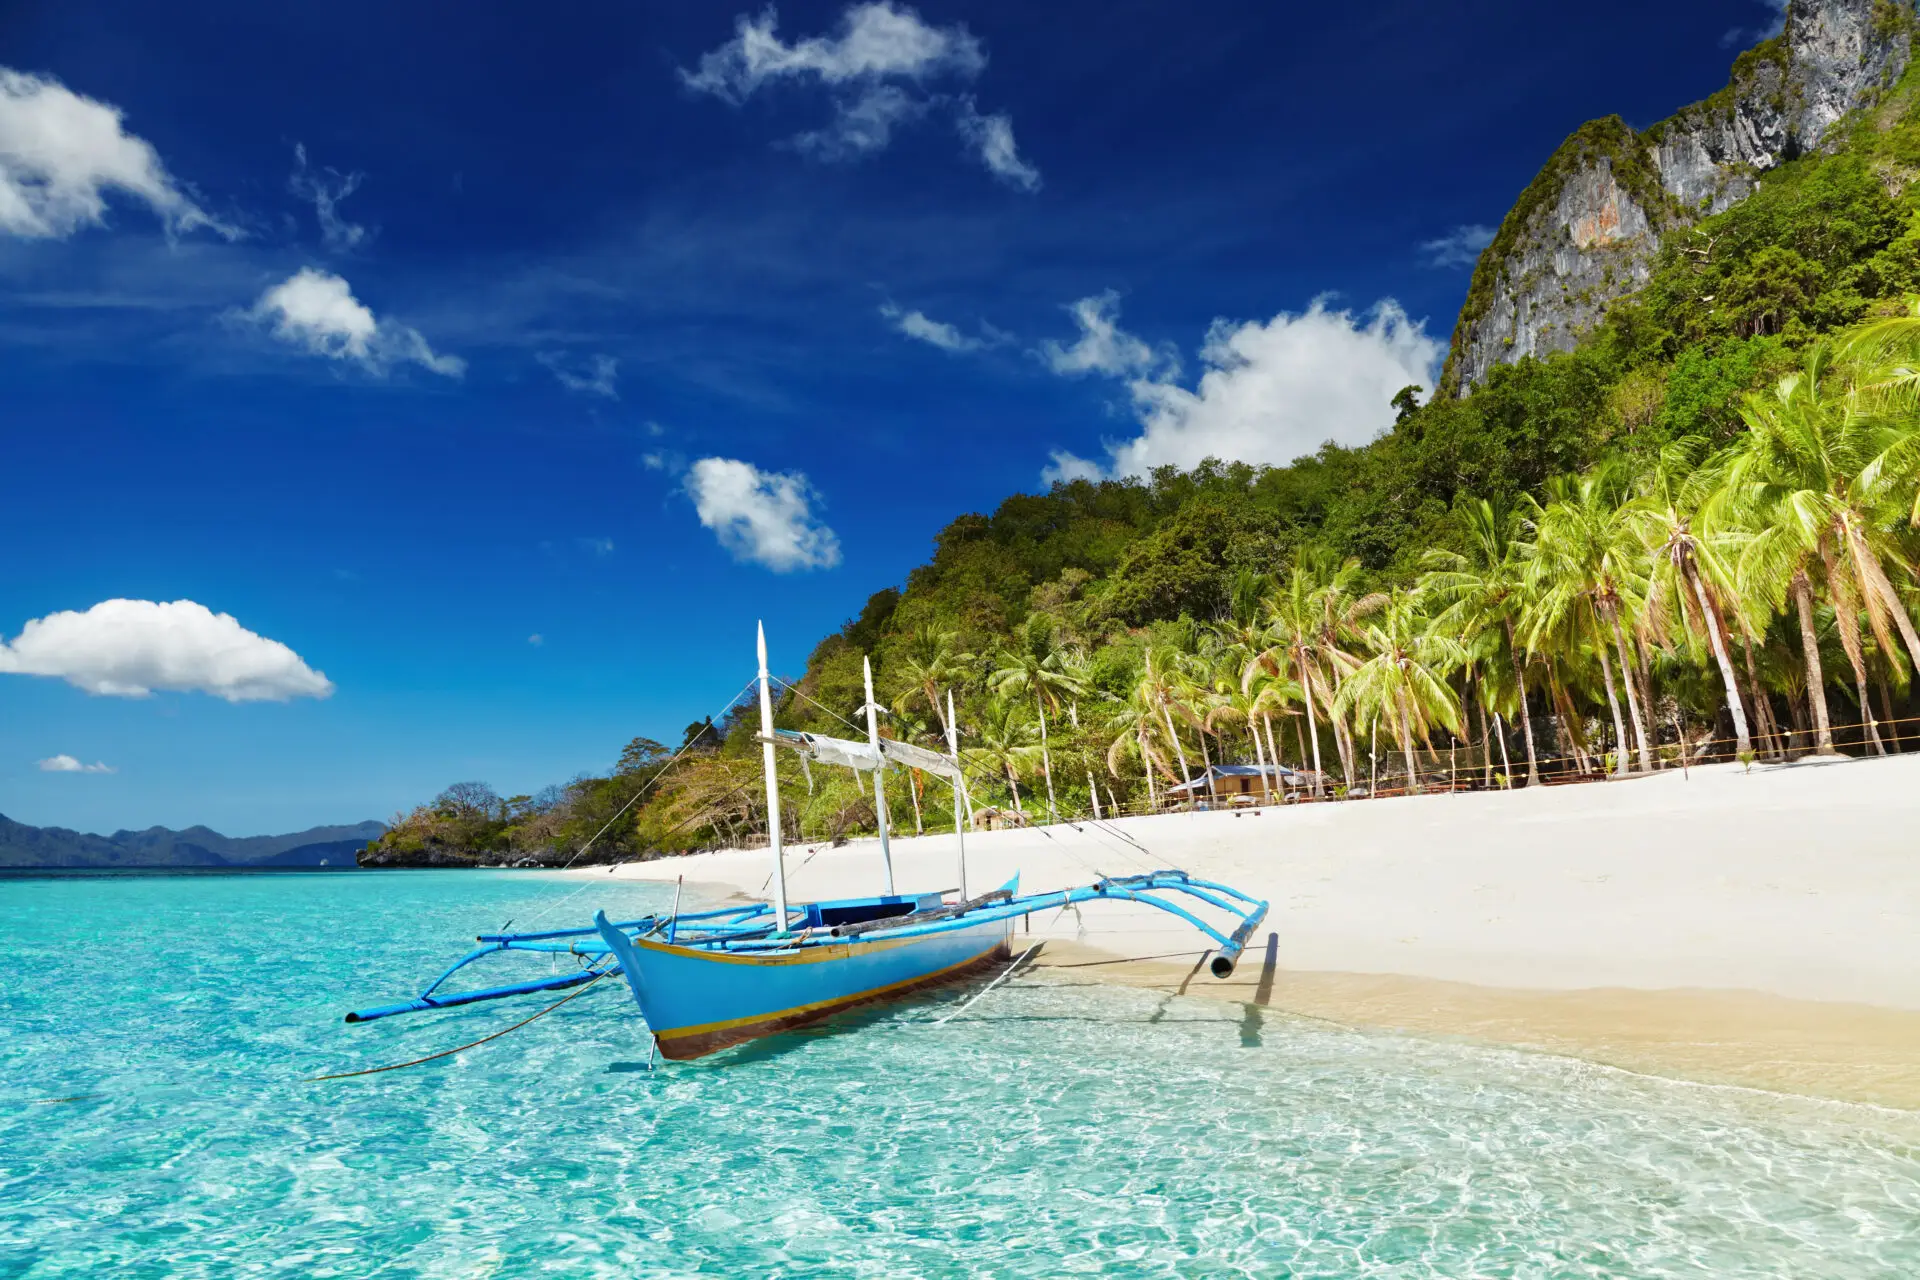 Philippines, Palawan, beach with boat